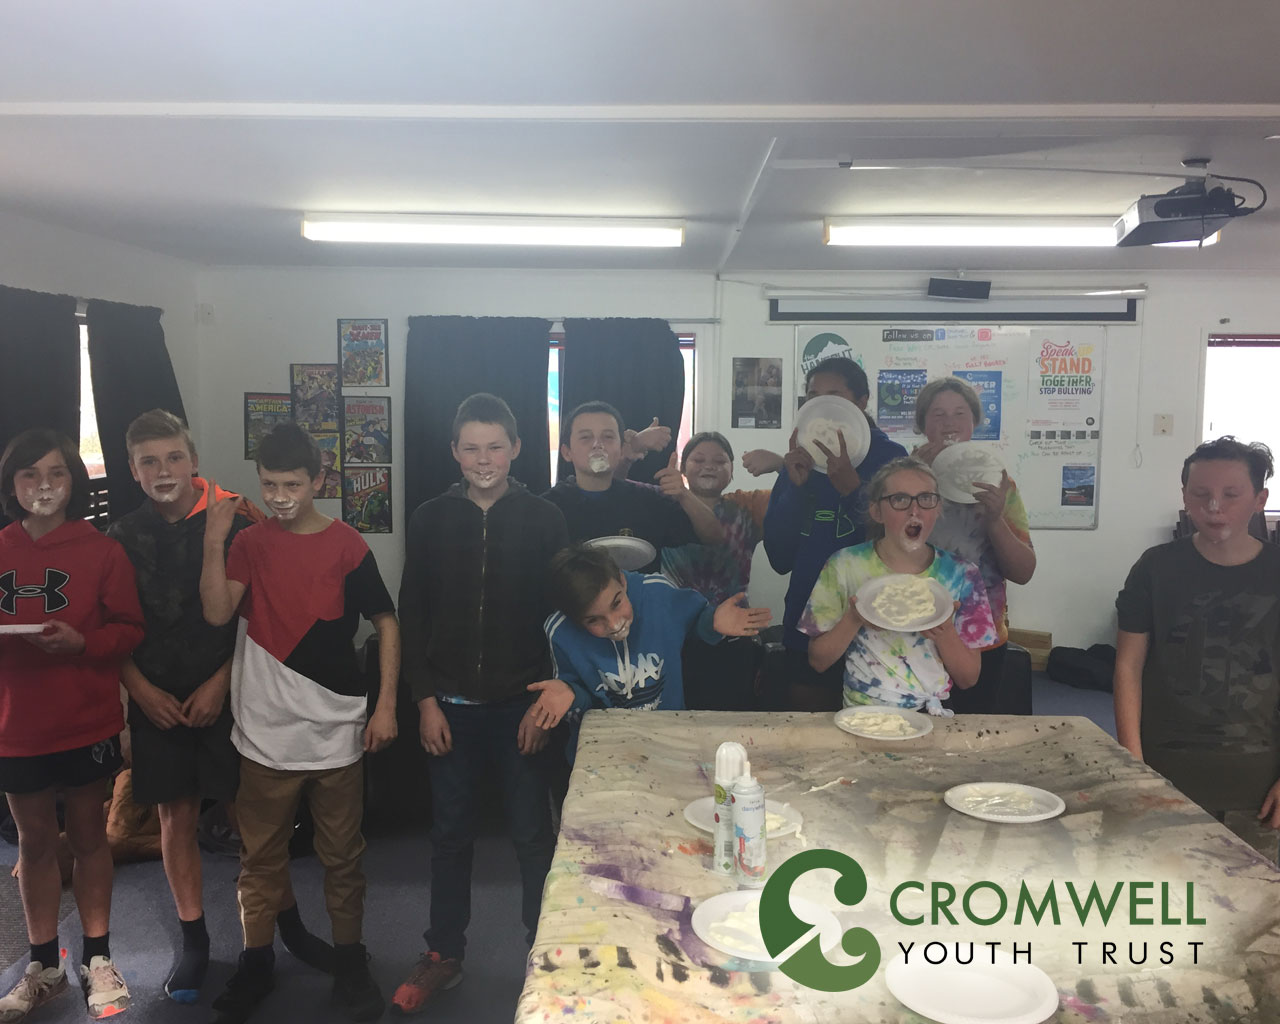 
Cromwell Youth Trust